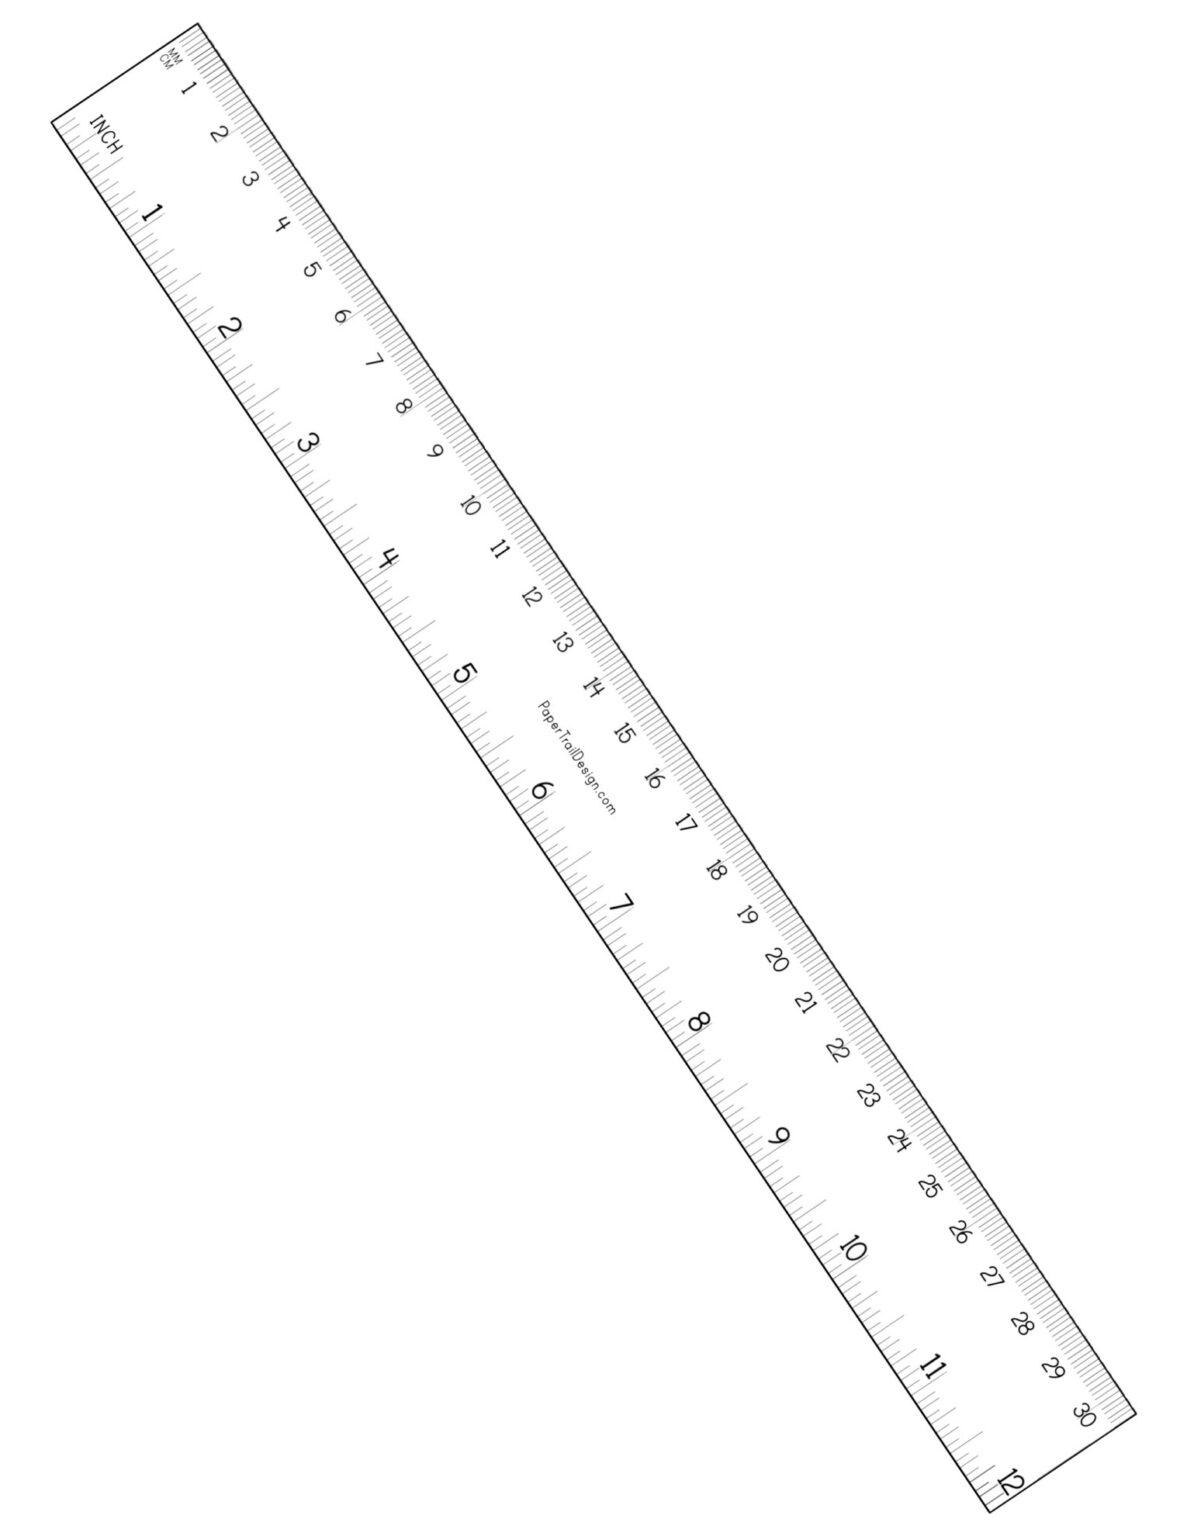 12 inch ruler actual size